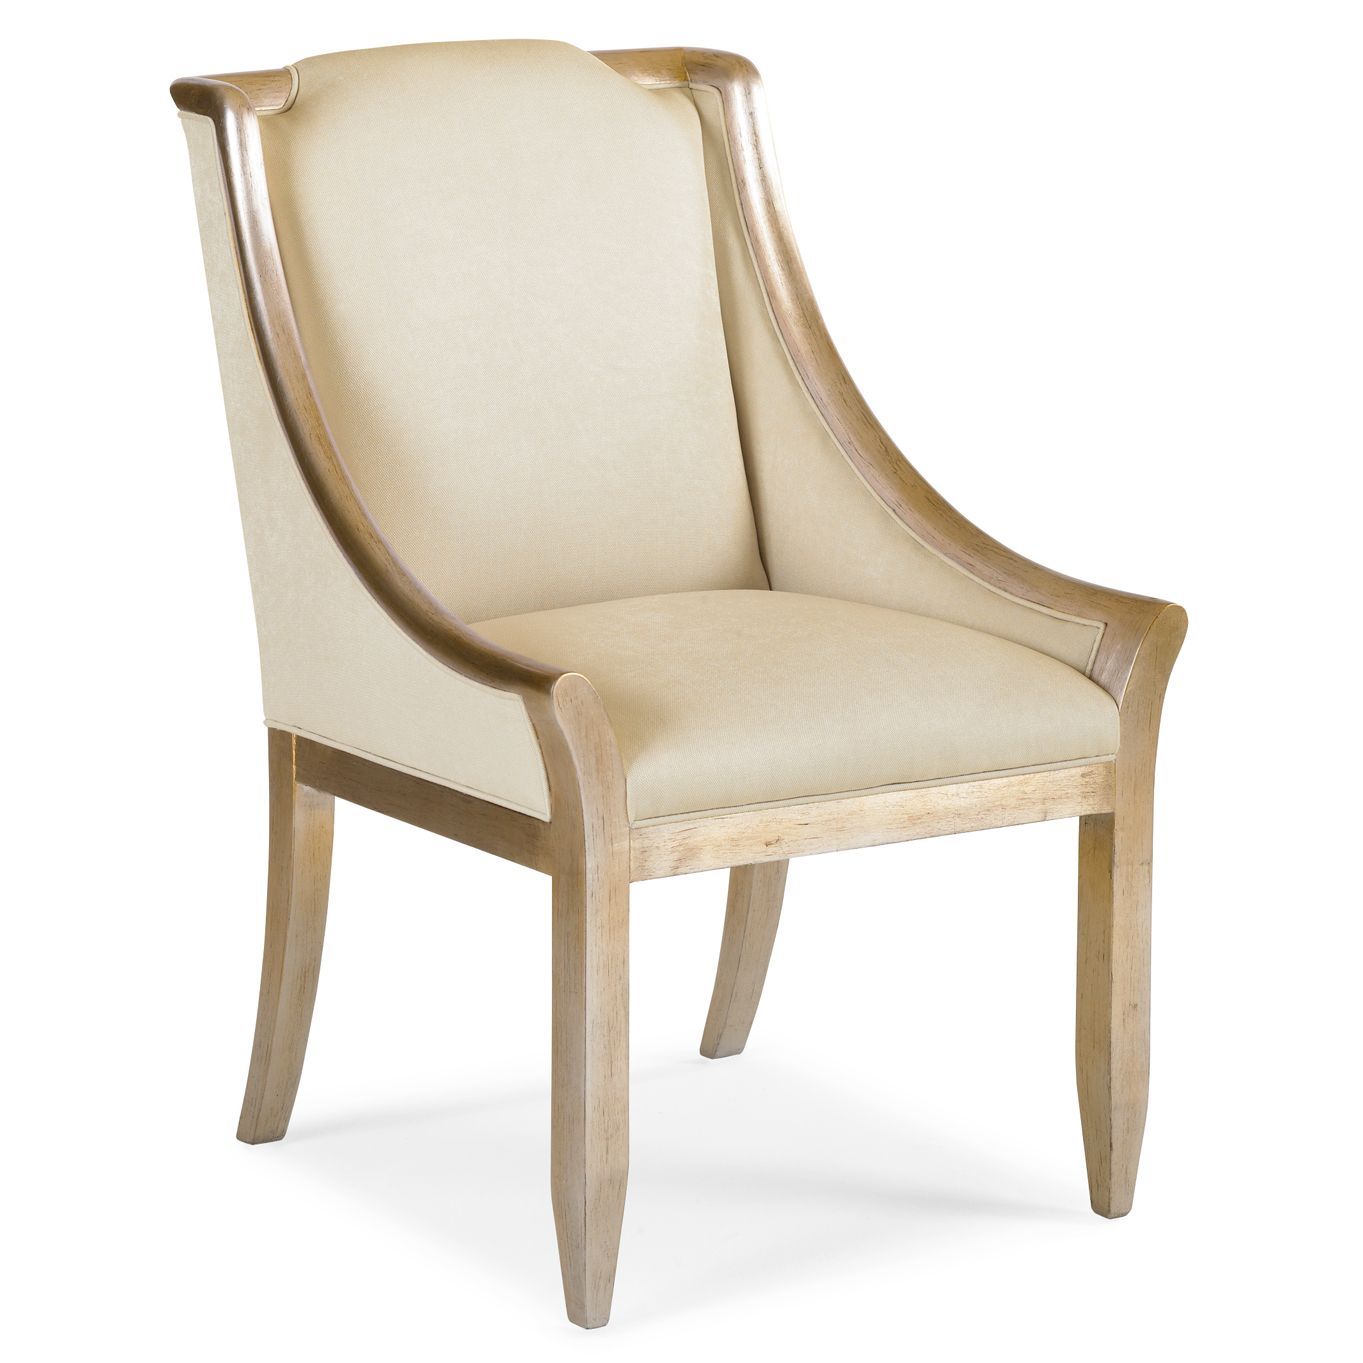 Silva Regency Champagne Patina Beige Dining Chair | Beige Within Carbon Loft Ariel Rocking Chairs In Espresso Pu And Walnut (View 9 of 20)